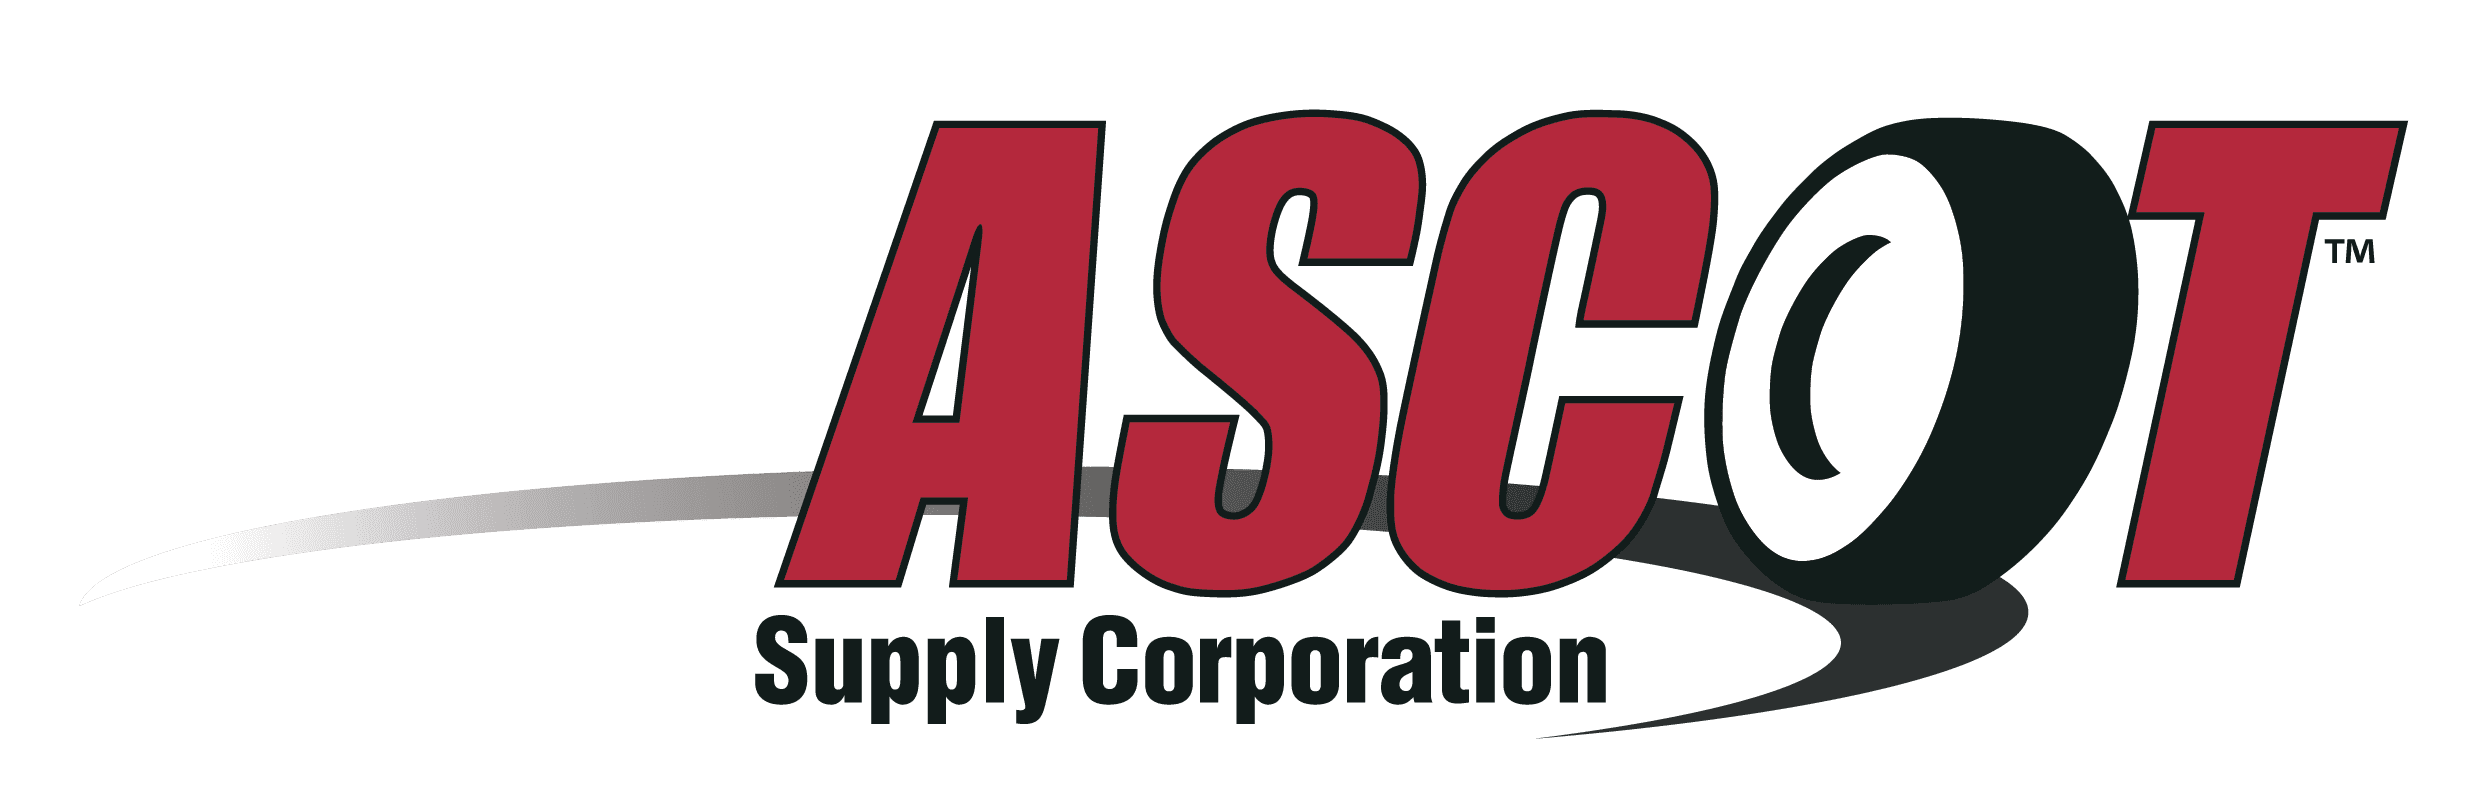 Display of Logo of Ascot supply corportaion